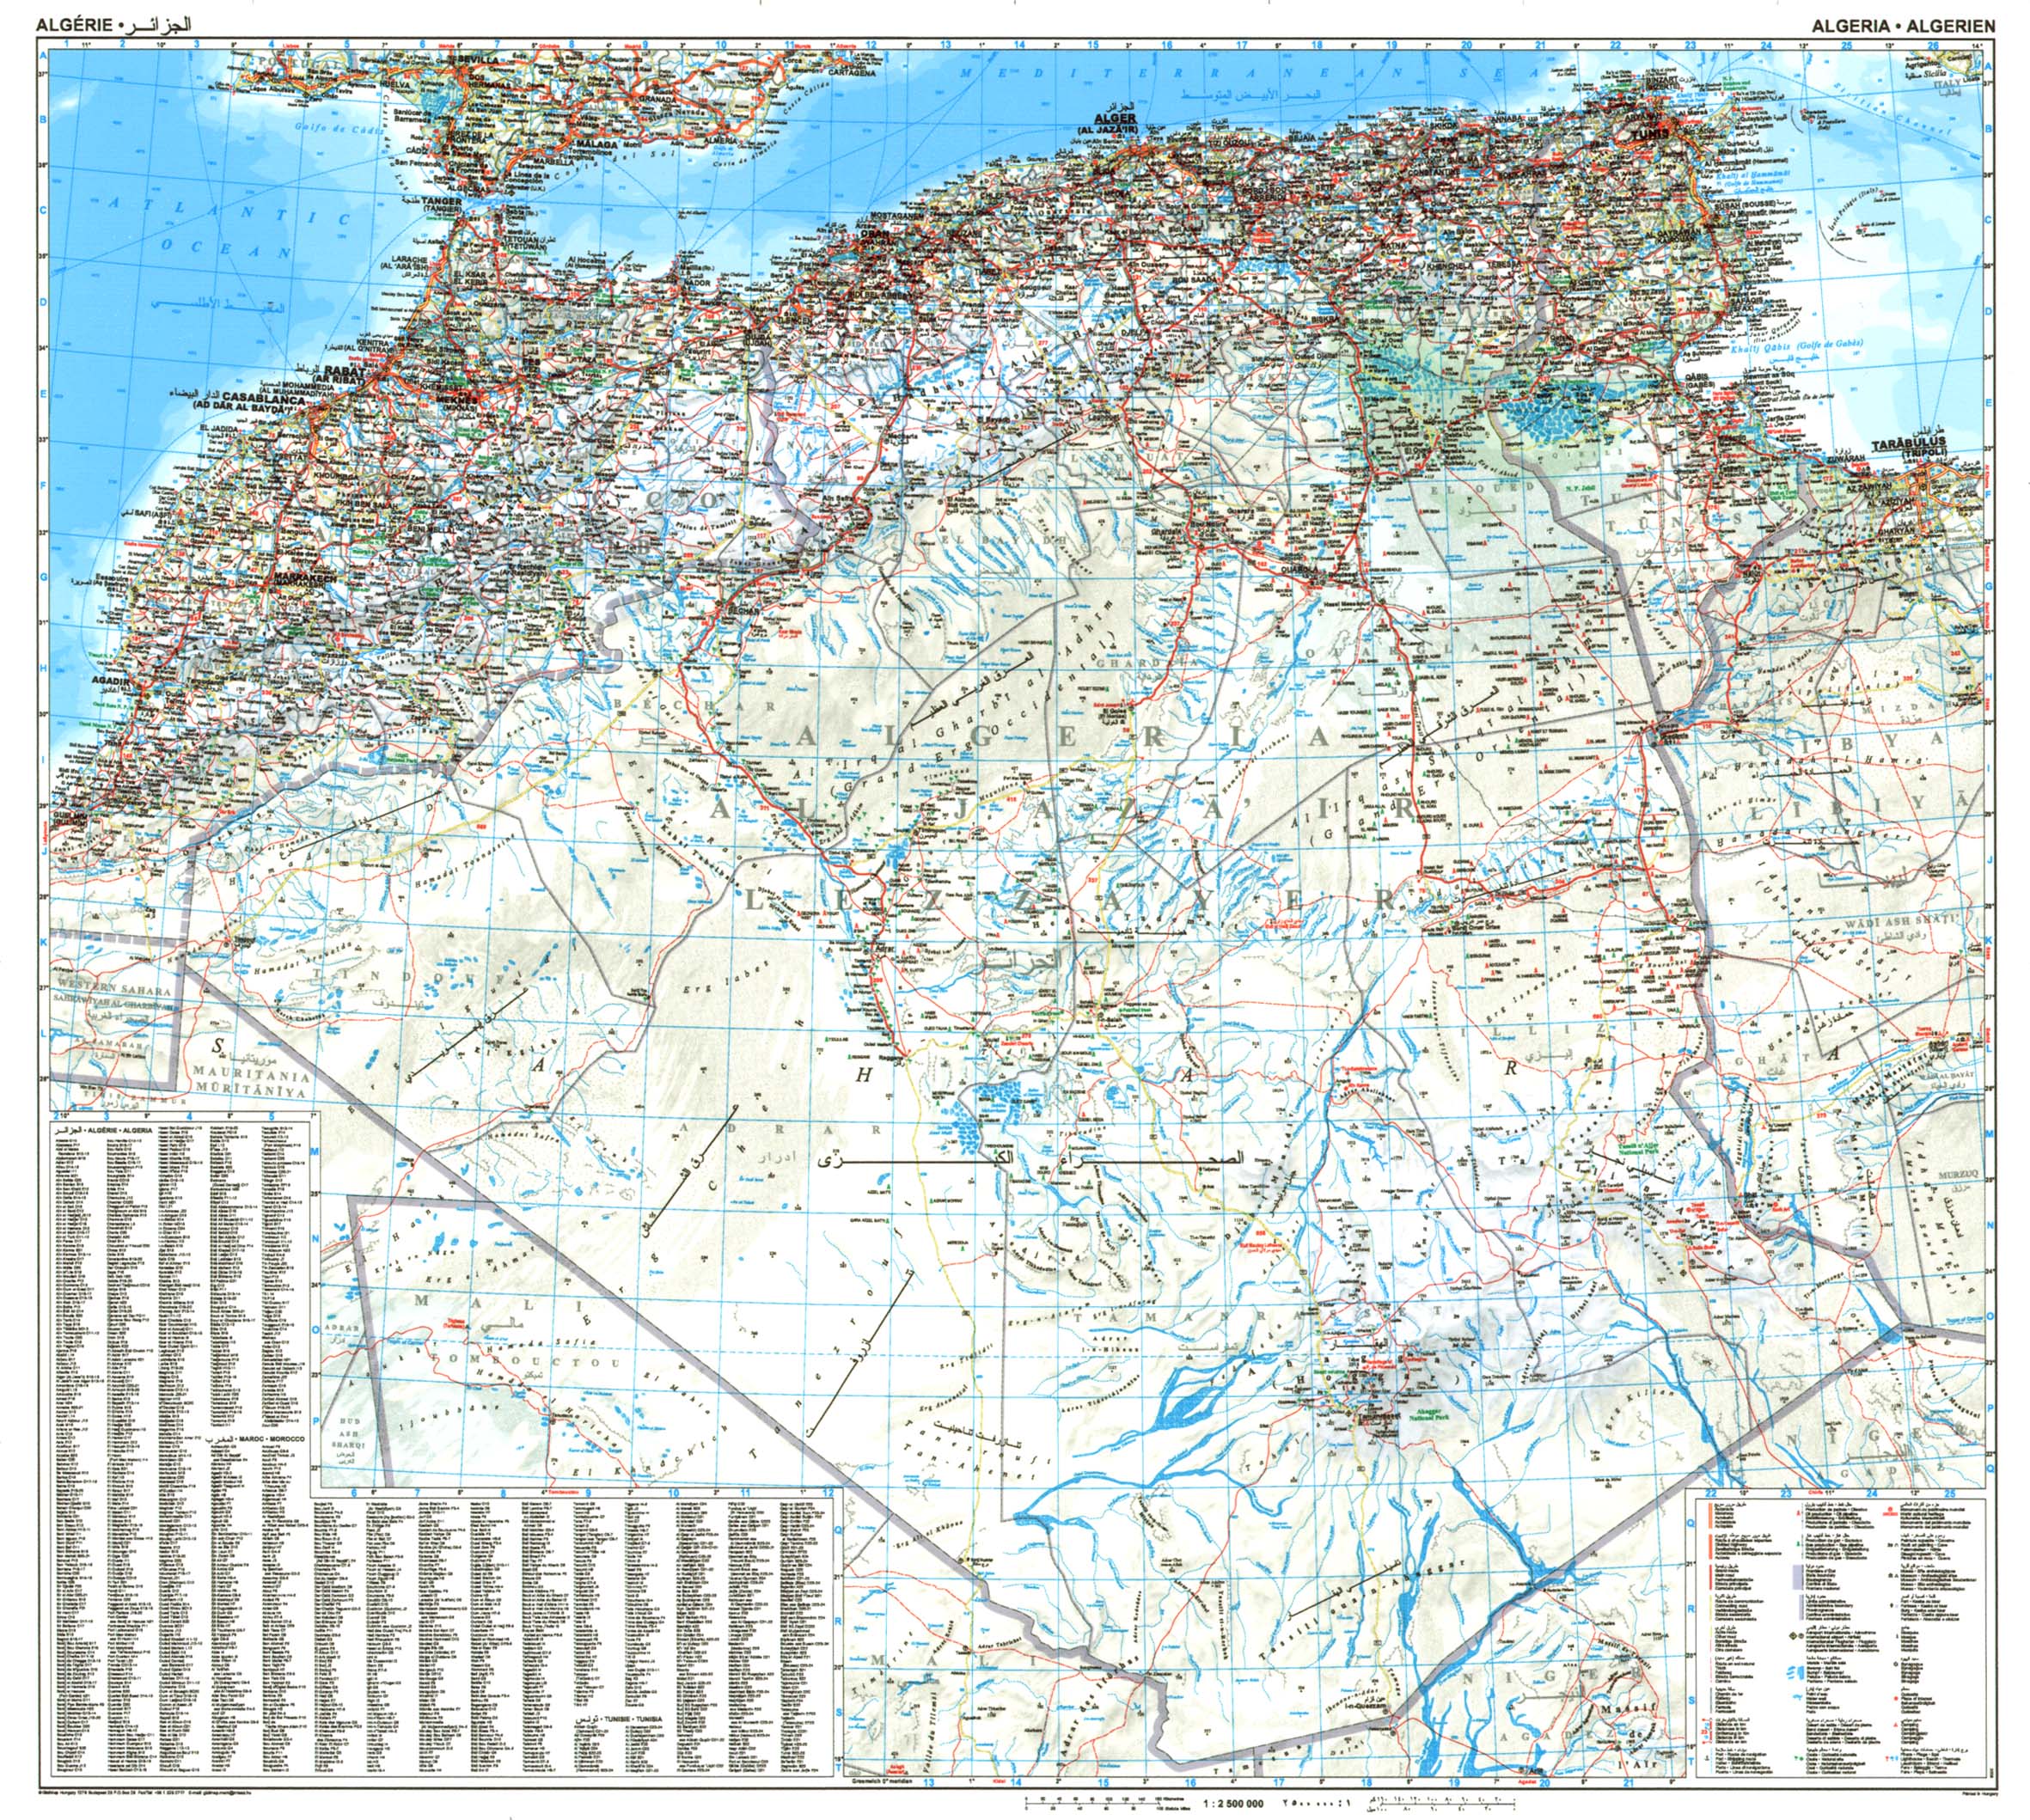 Algeria (road) overview map